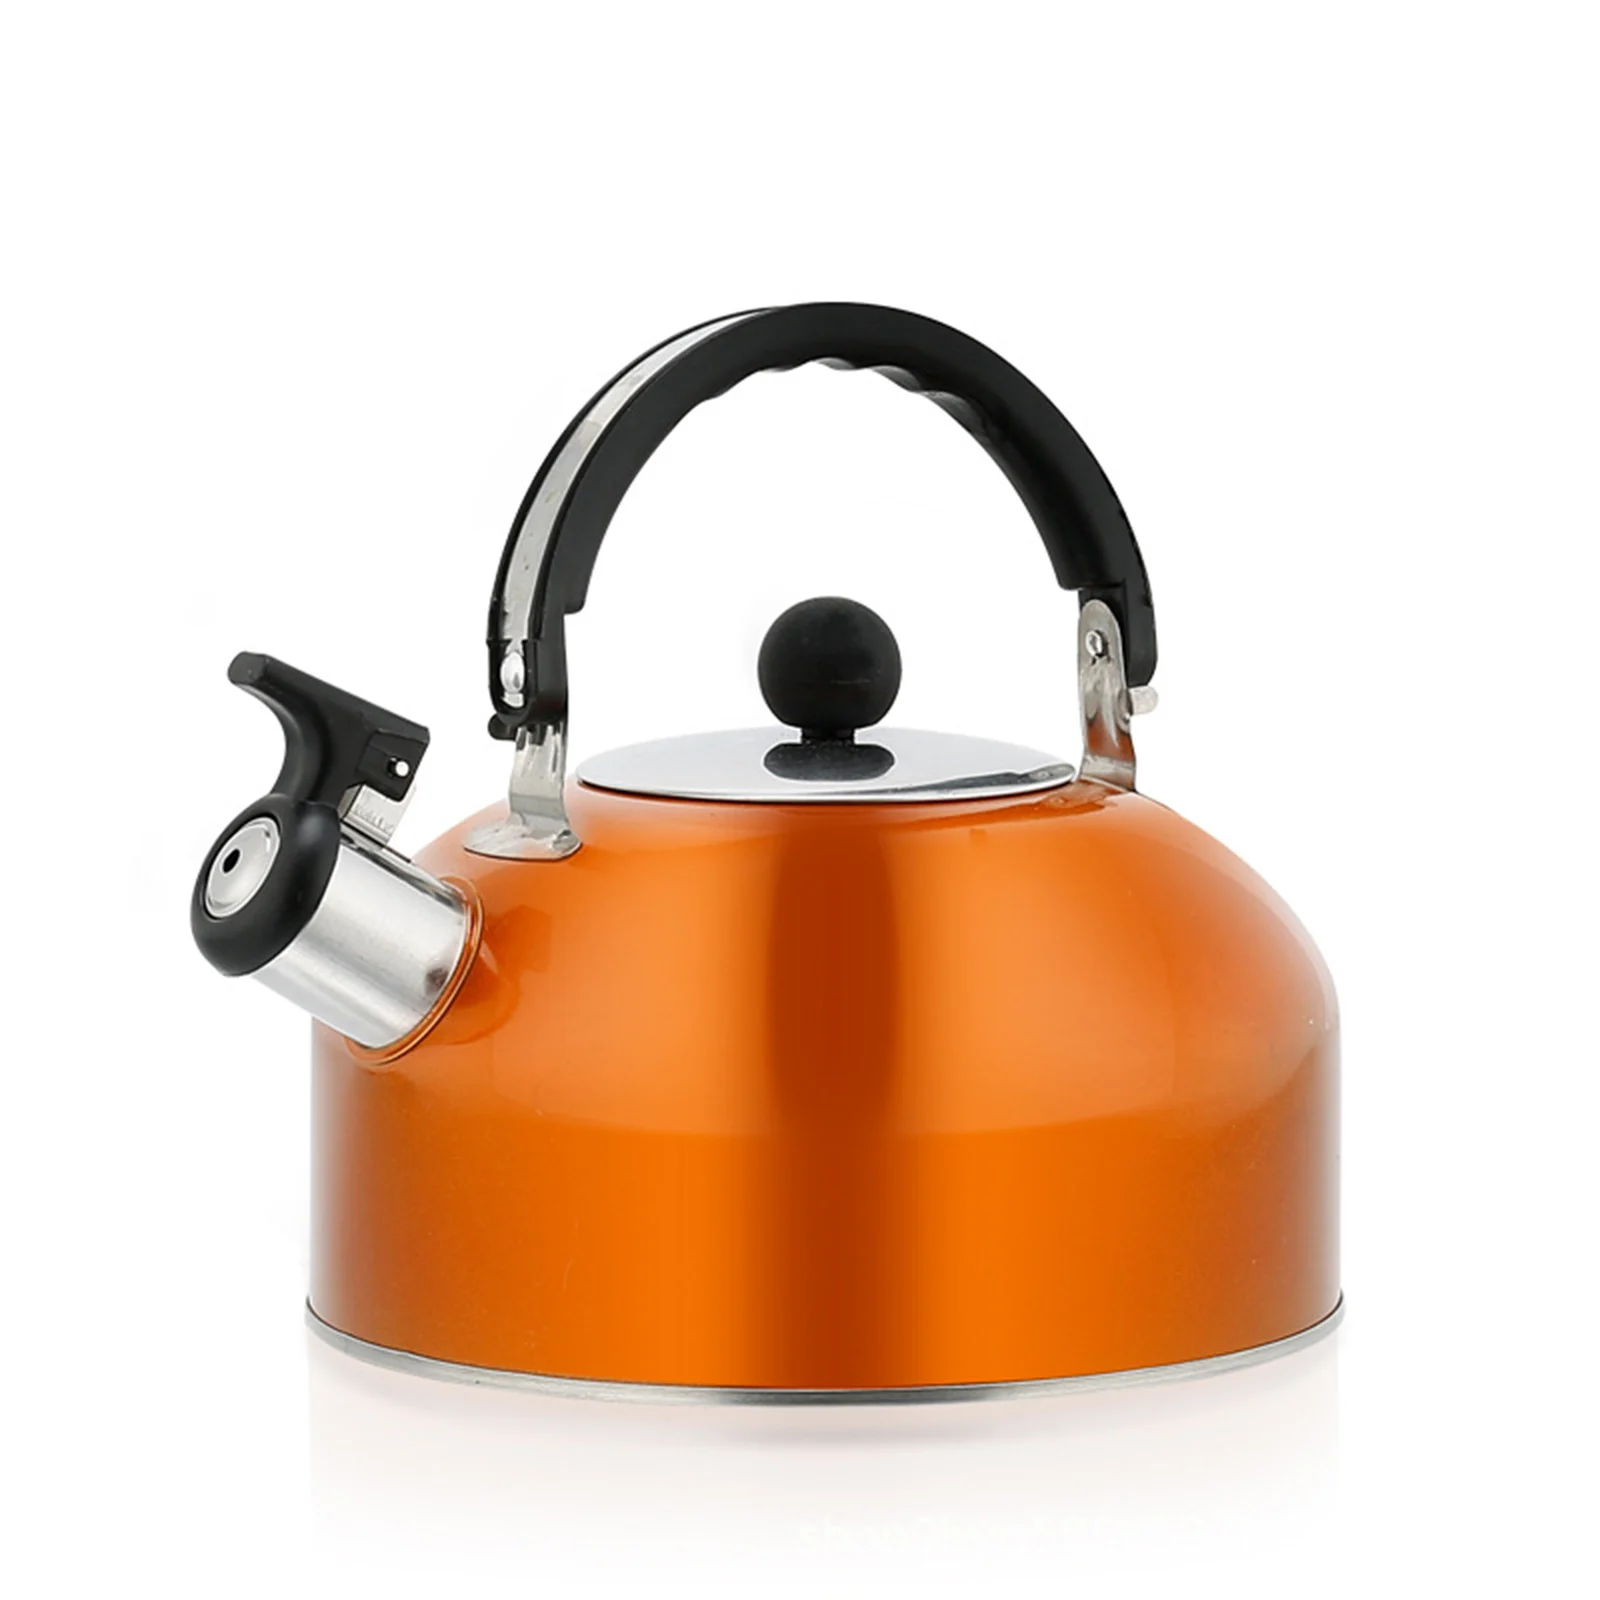 

Hot Water Bottle 3 Liter Kettle Stainless Steel Stovetop Water Bottle Teapot Tent Supplies Whistle Spout 3L Capacity